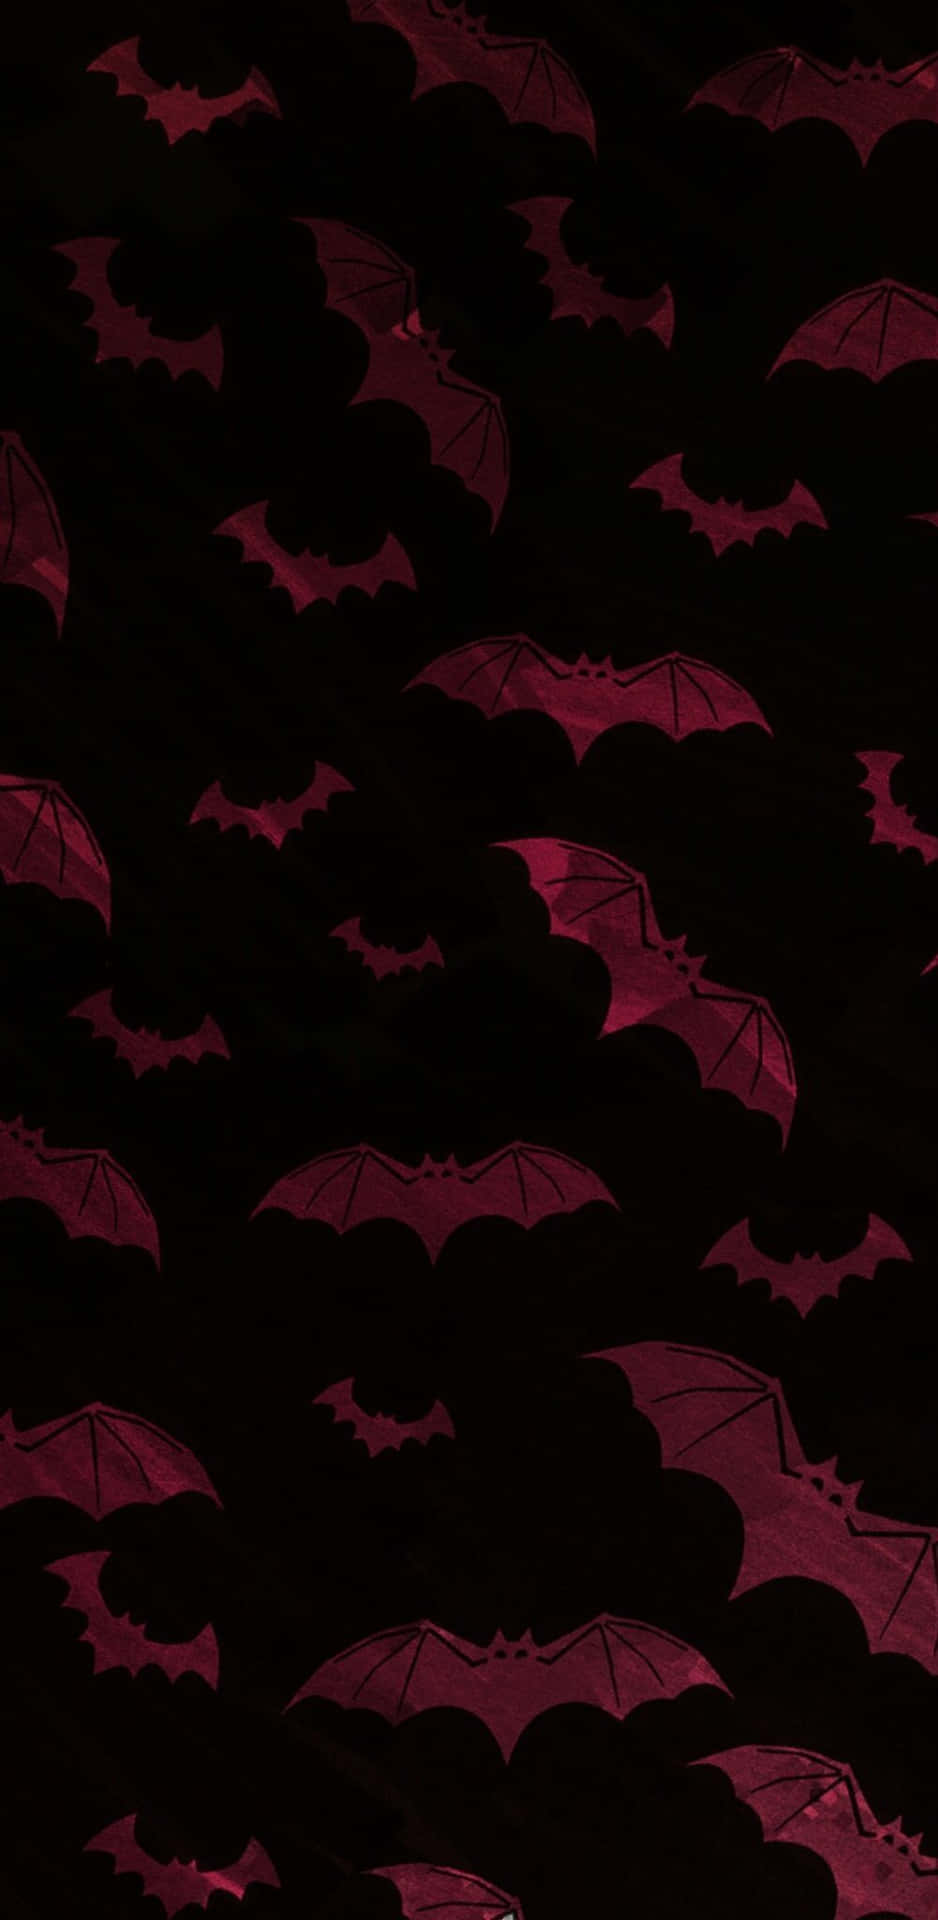 Red Bats Black Background Gothic Iphone Wallpaper